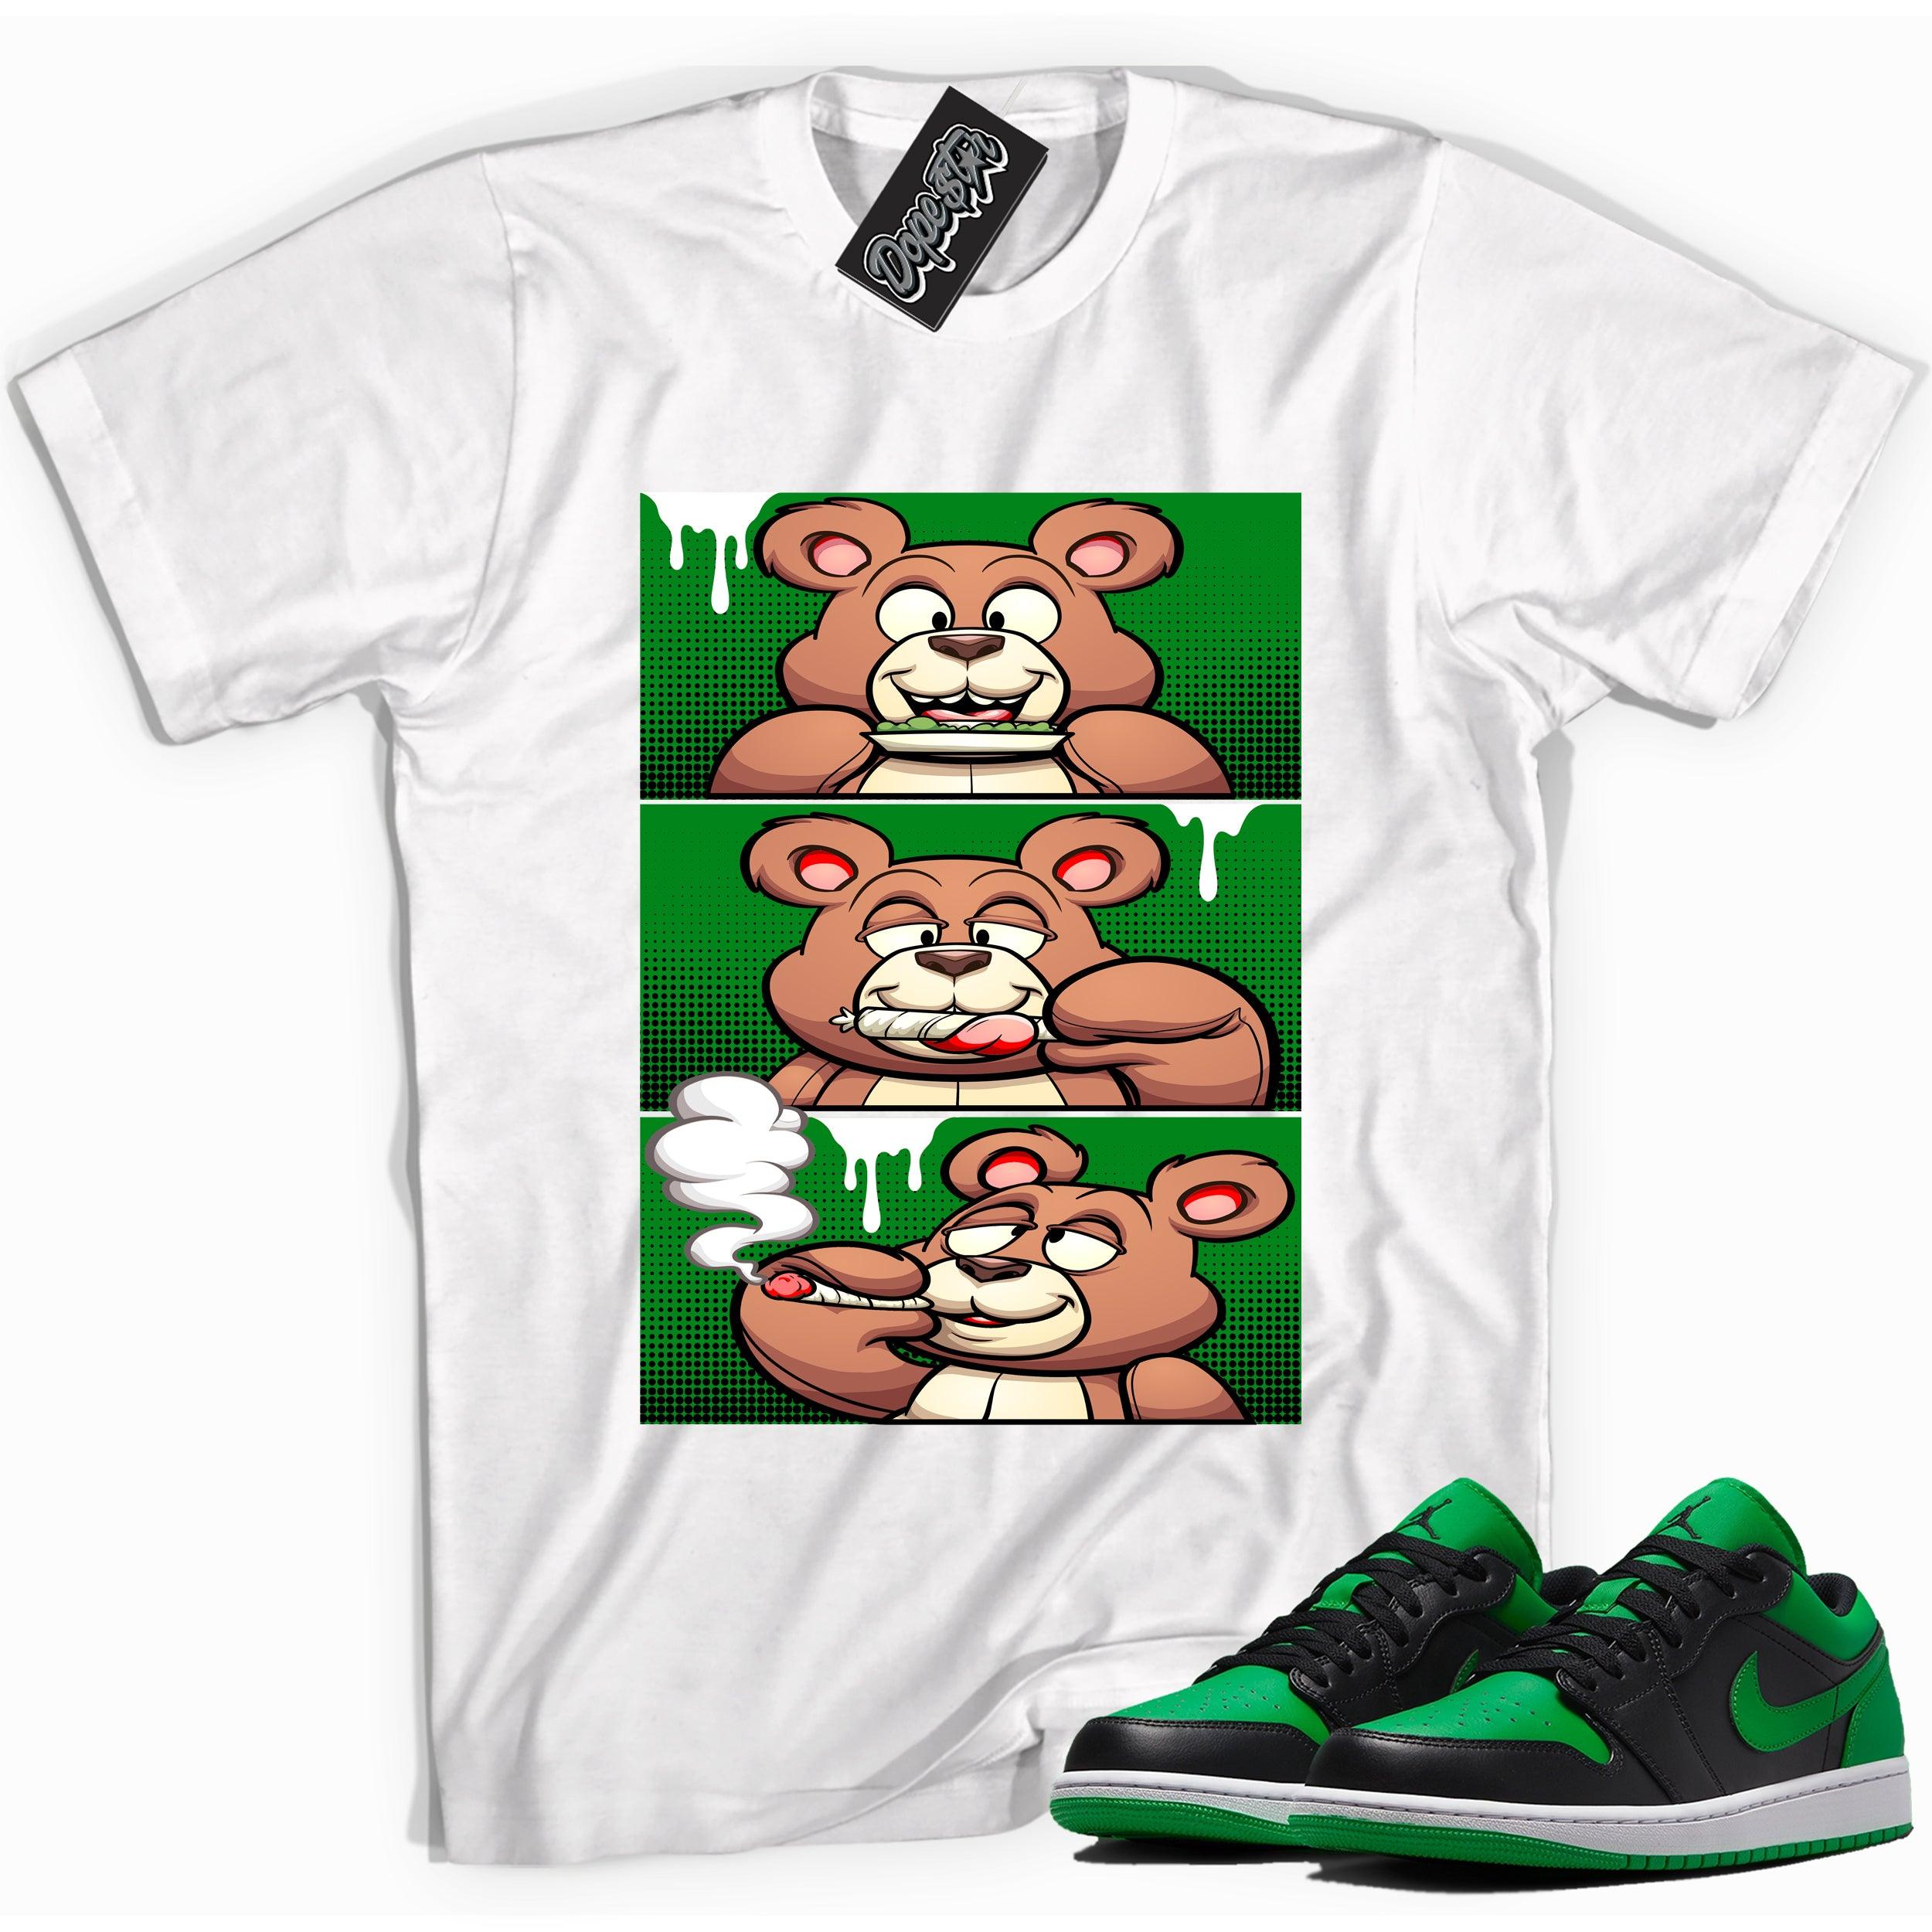 Cool white graphic tee with 'roll it lick it smoke it bear' print, that perfectly matches Air Jordan 1 Low Lucky Green sneakers